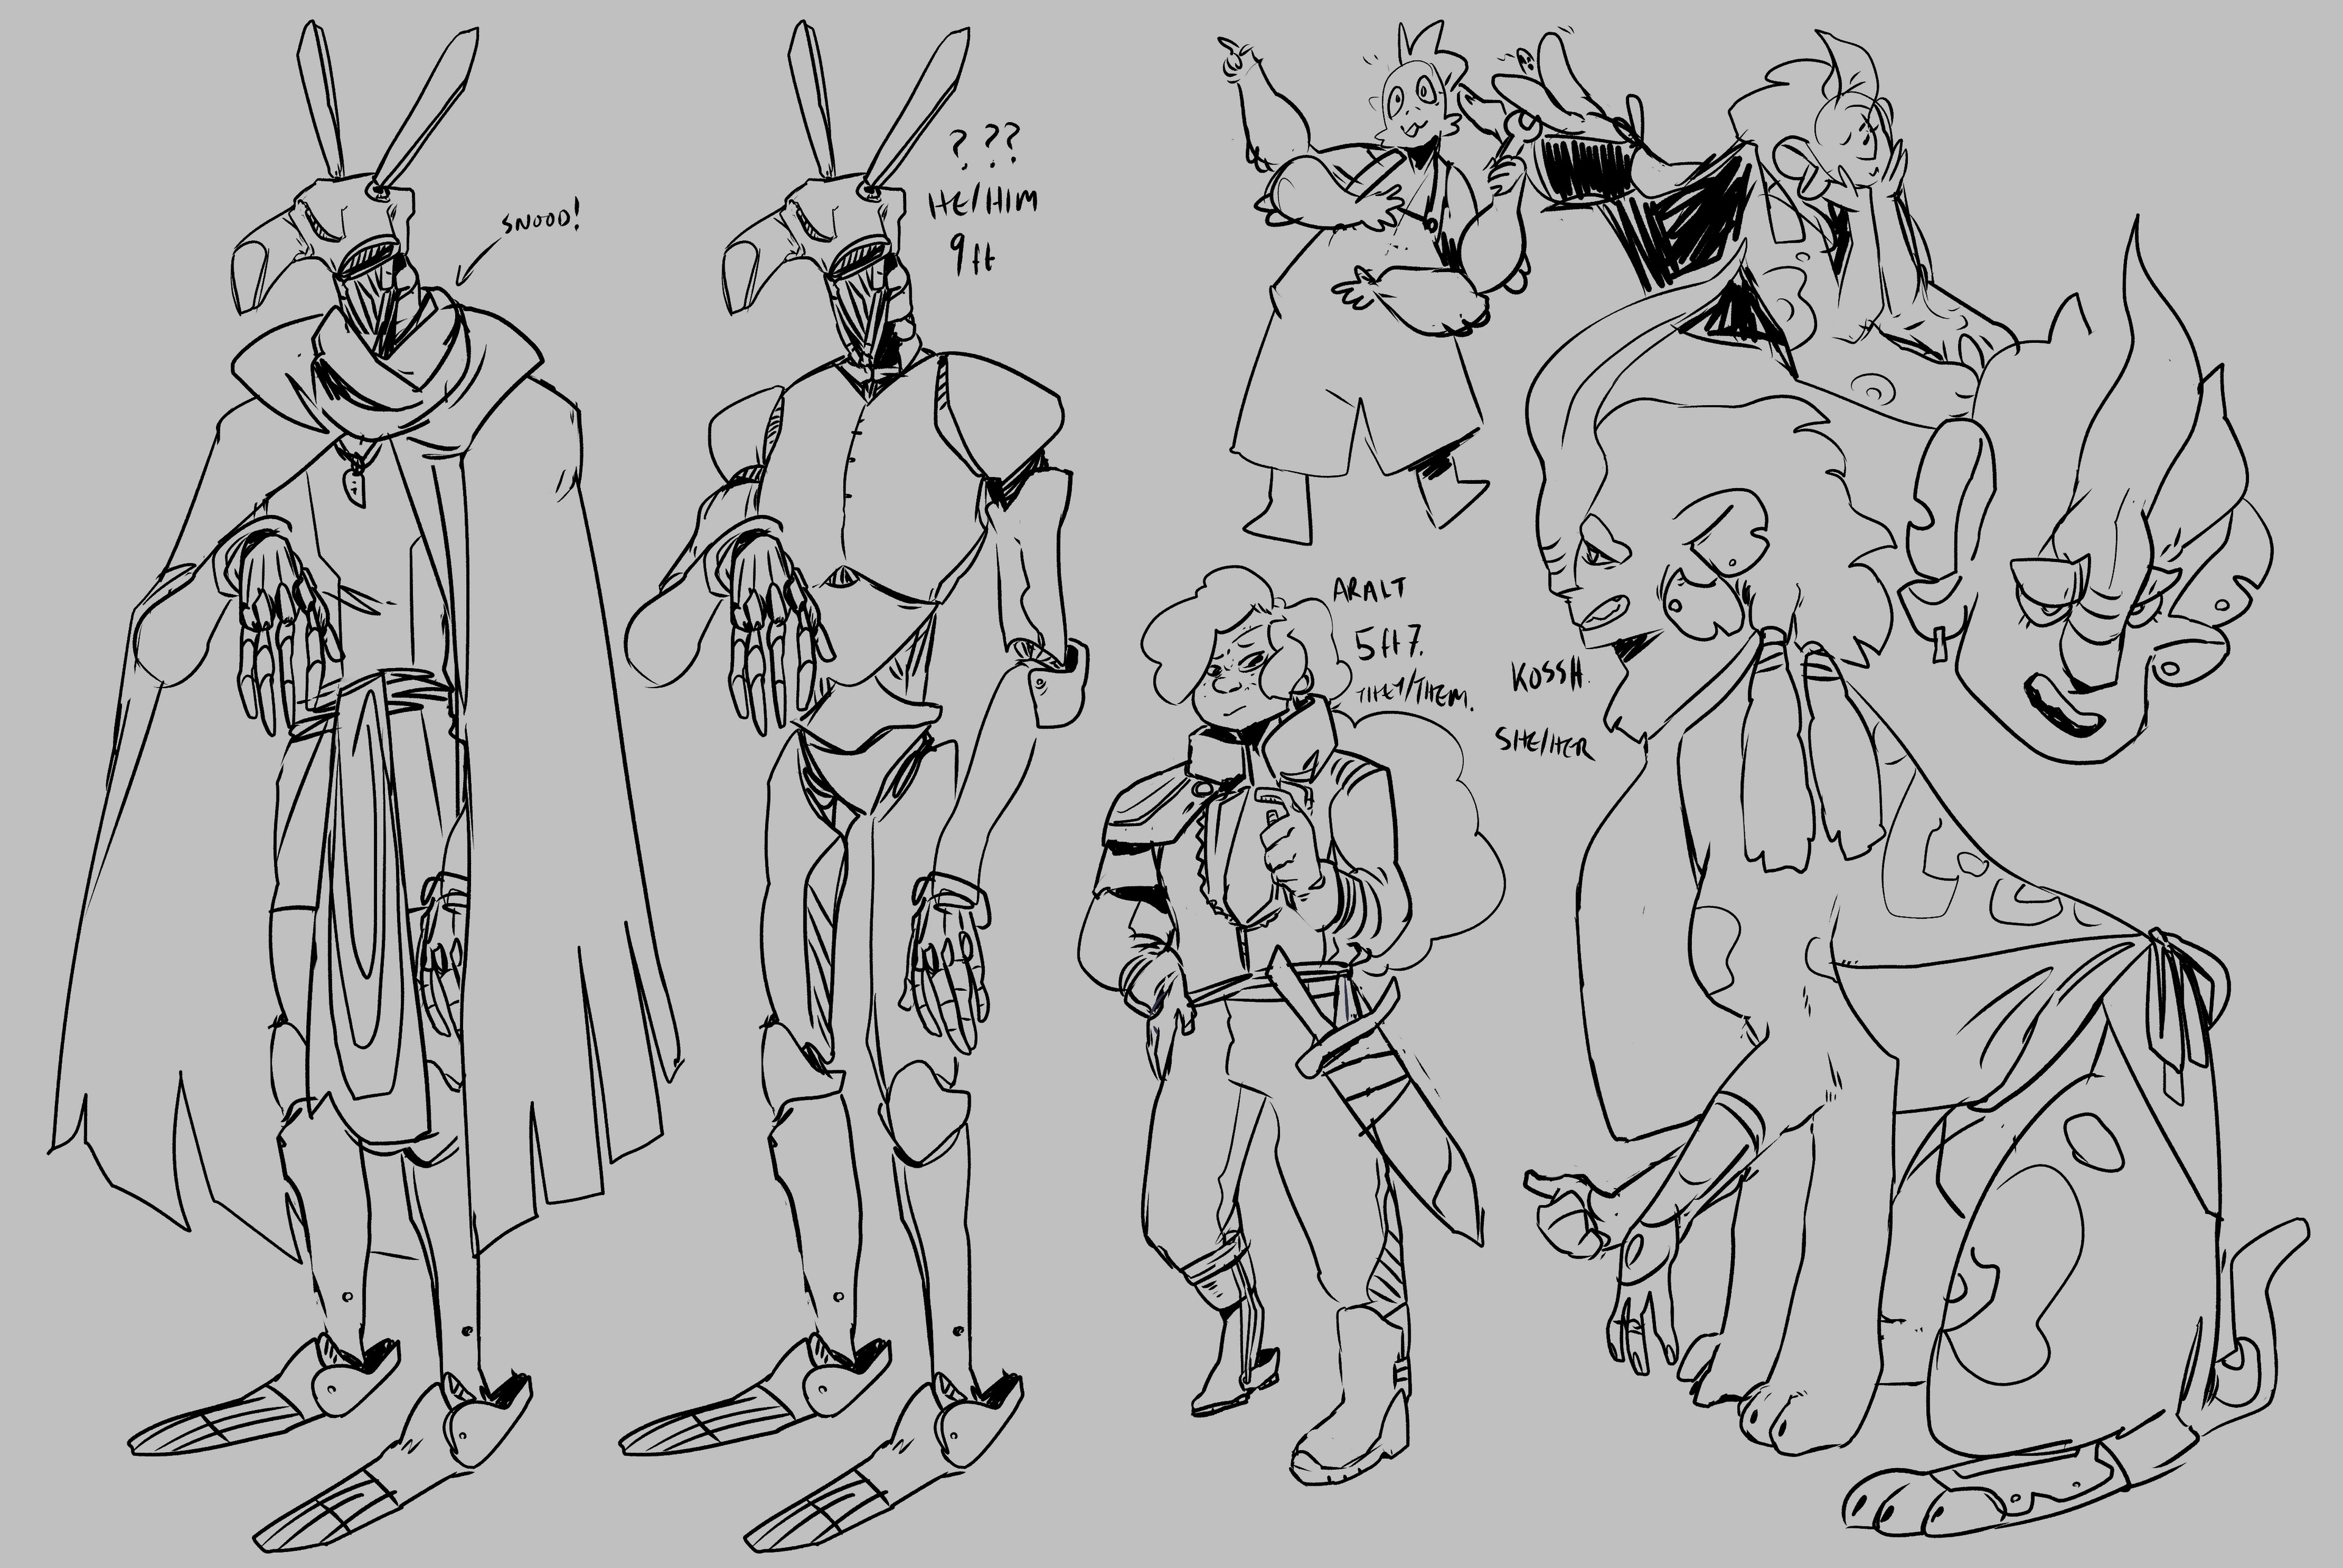 Early character designs for a scifi setting